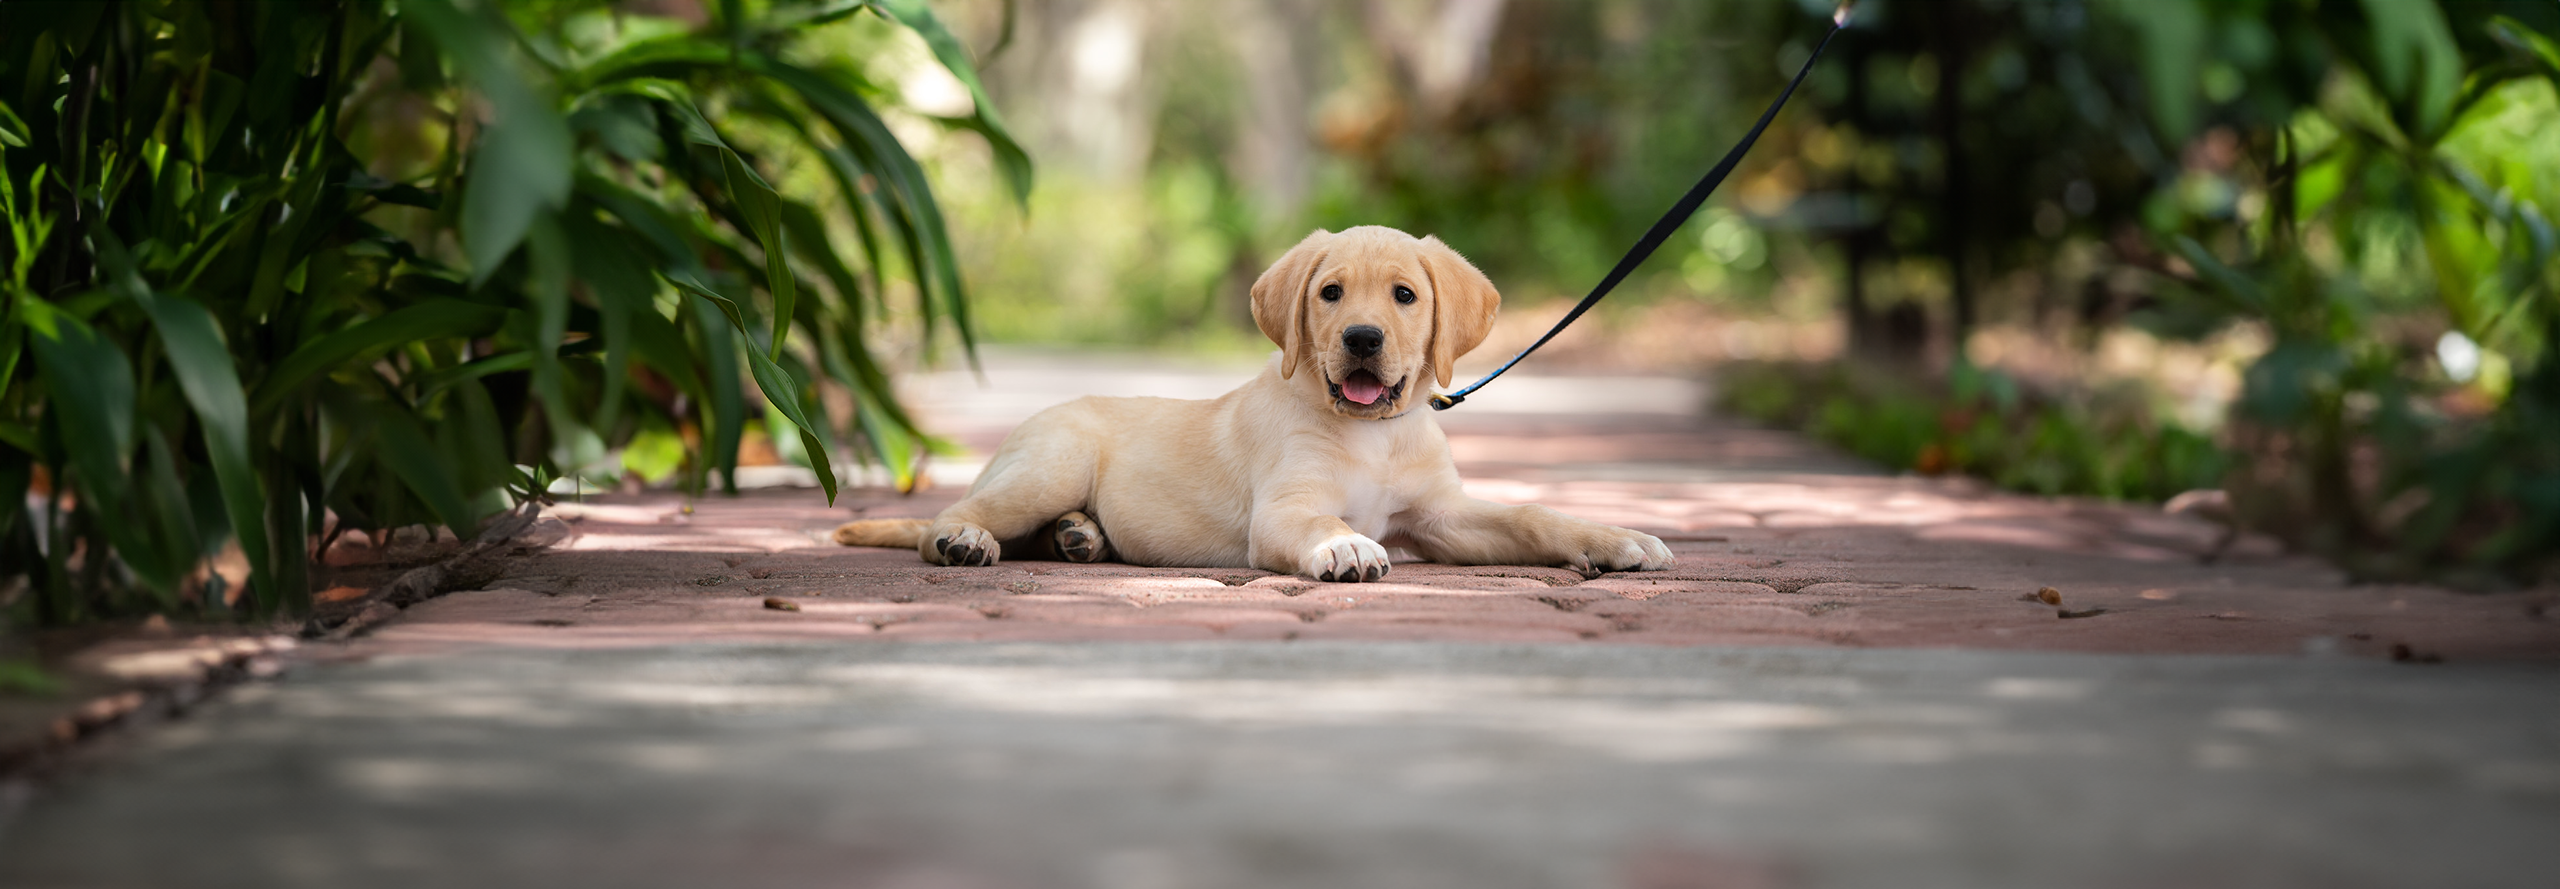 A young yellow lab puppy lays on the side walk surrounded by lush greenery